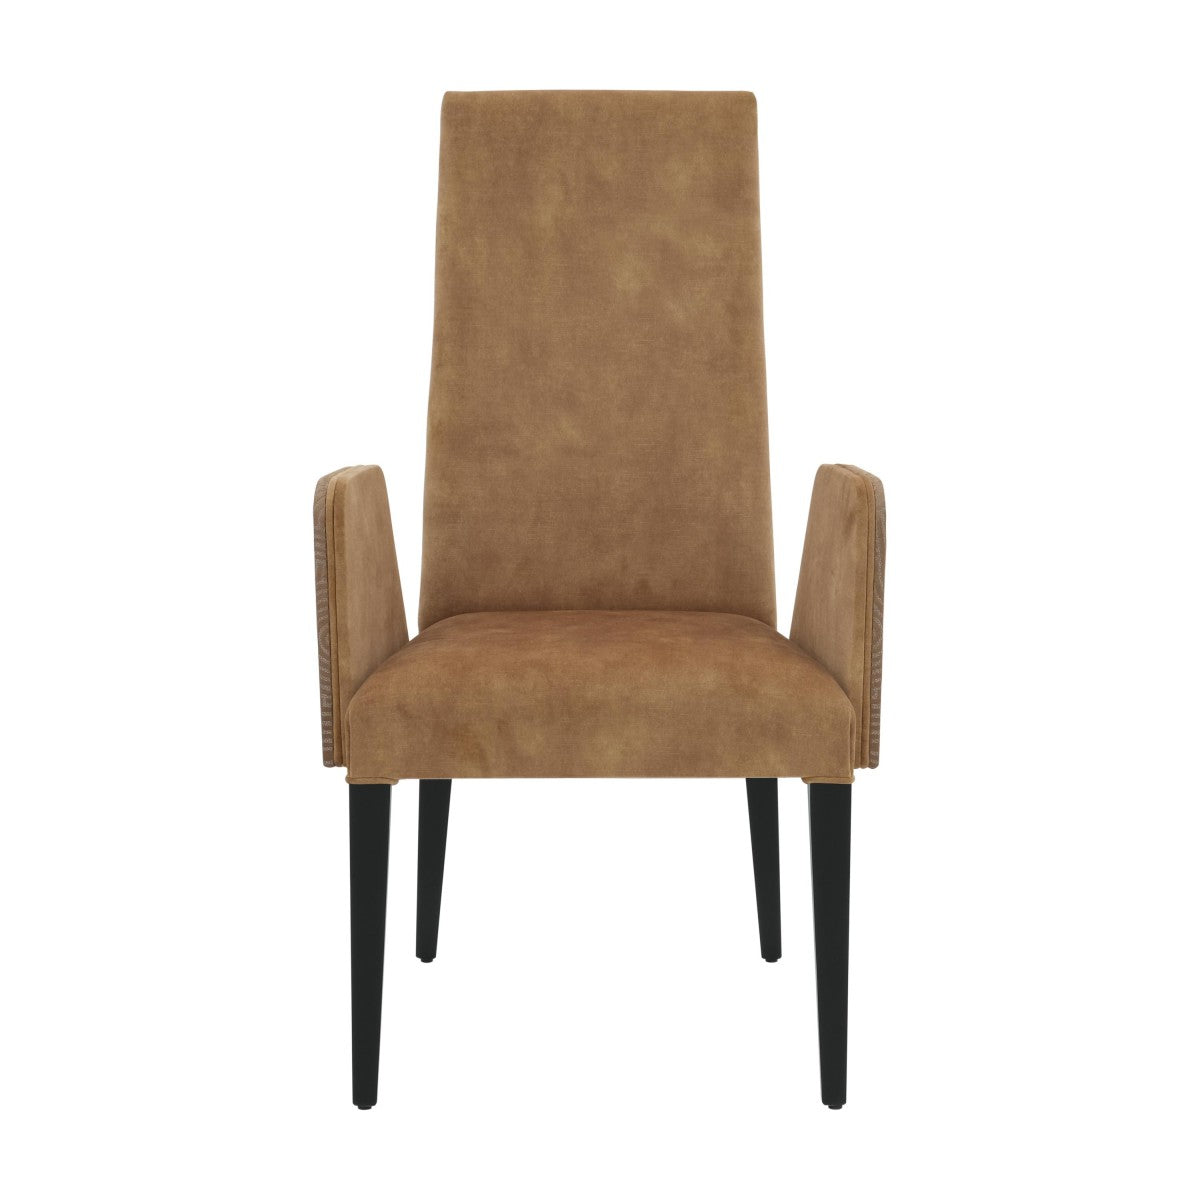 Wave Bespoke Upholstered Retro Contemporary Dining Armchair Chair MS027A Custom Made To Order